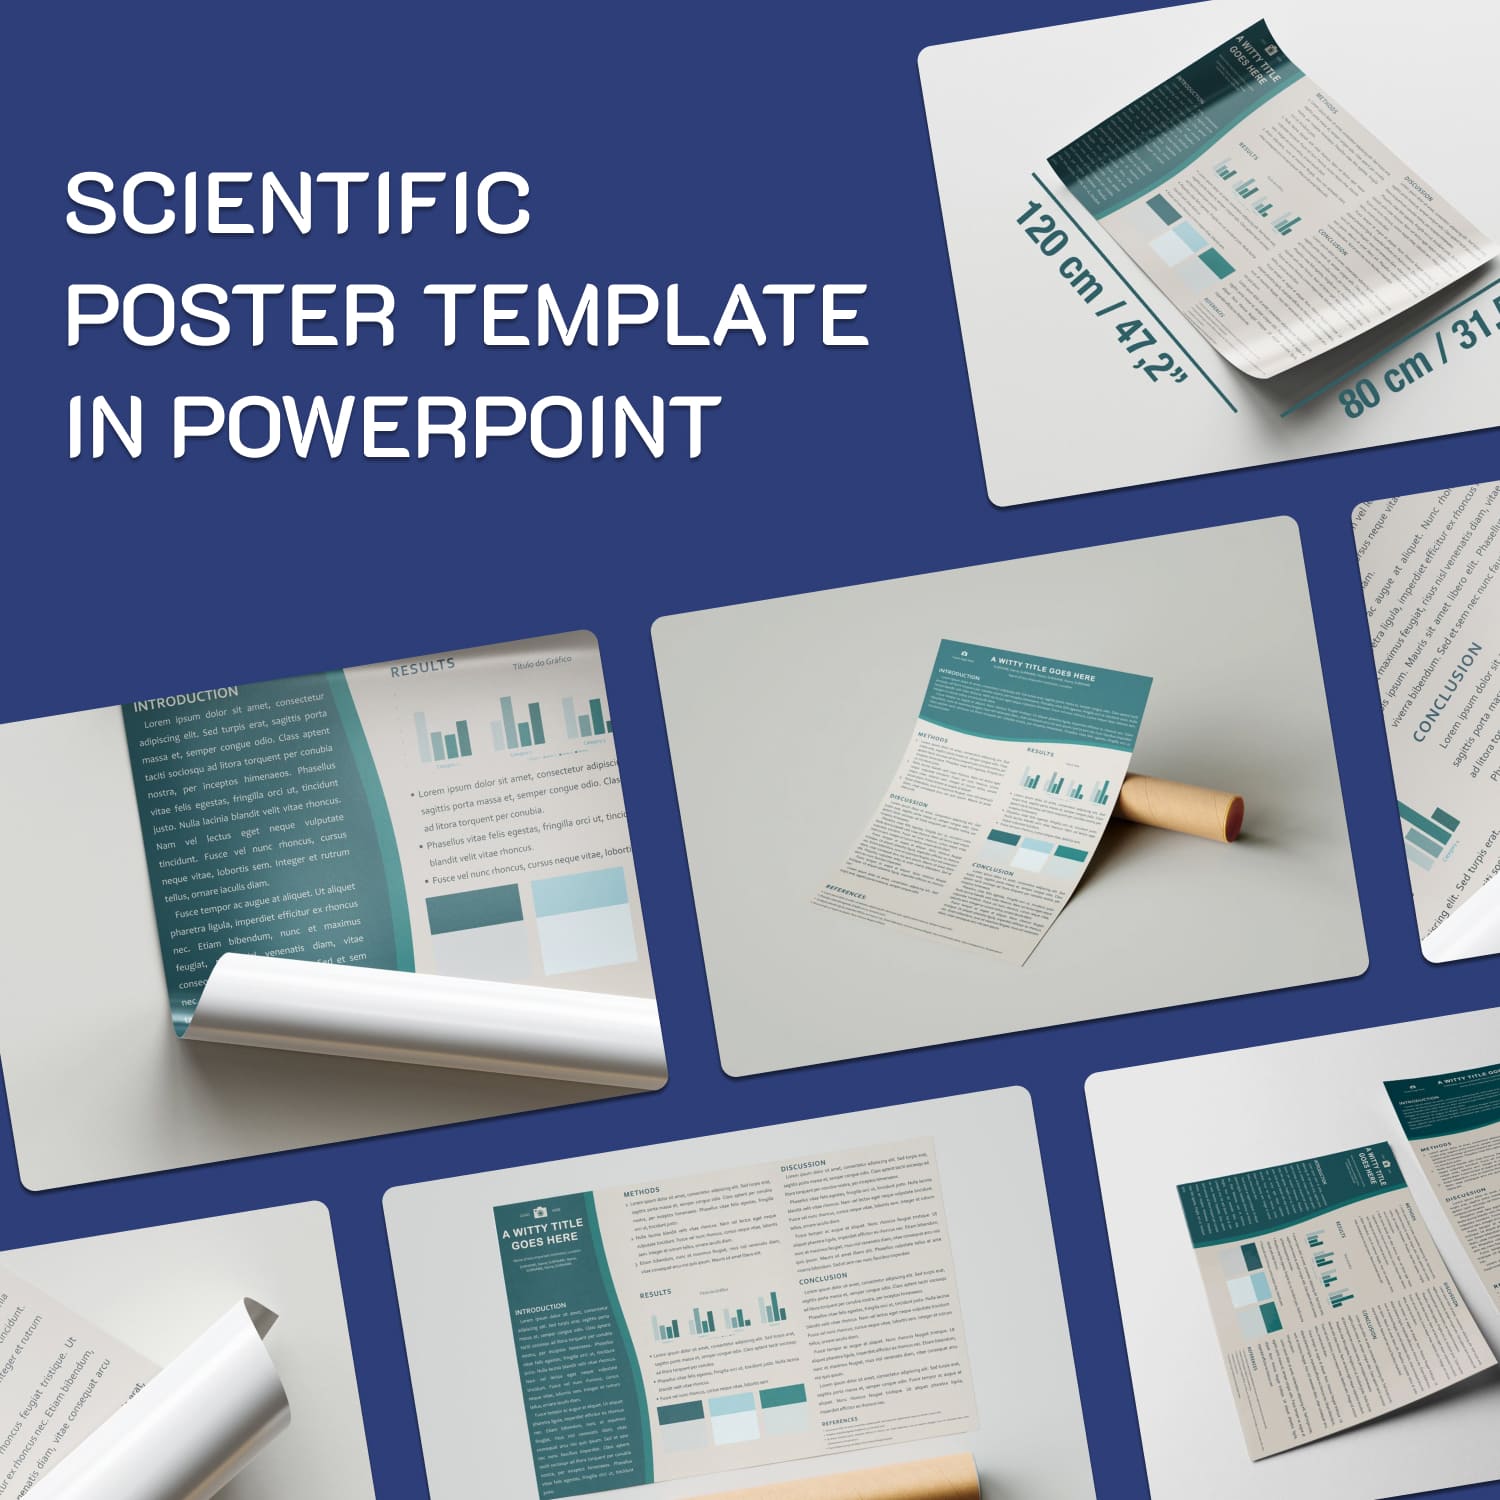 Science Poster Model In Powerpoint | Warm Blue | Horizontal.